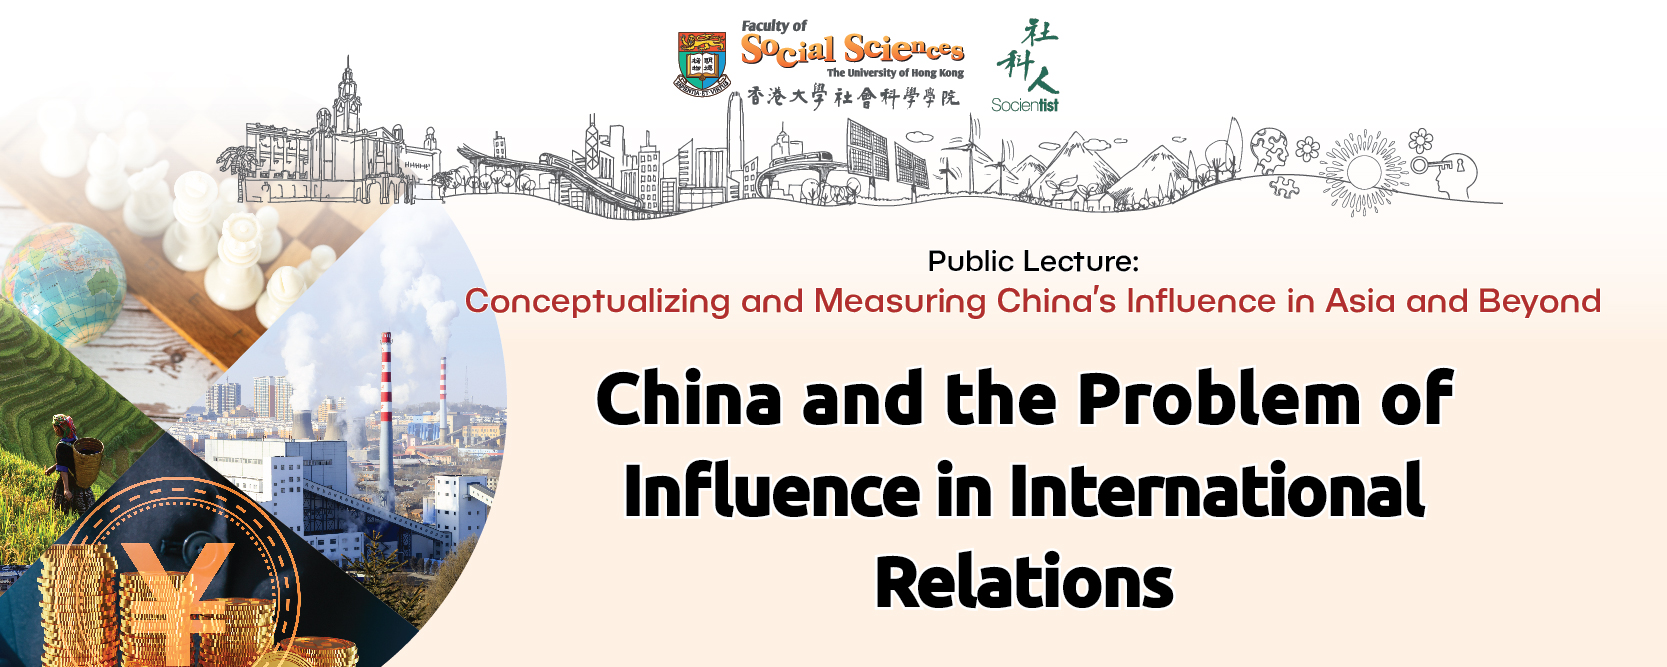 China and the problem of influence in international relations